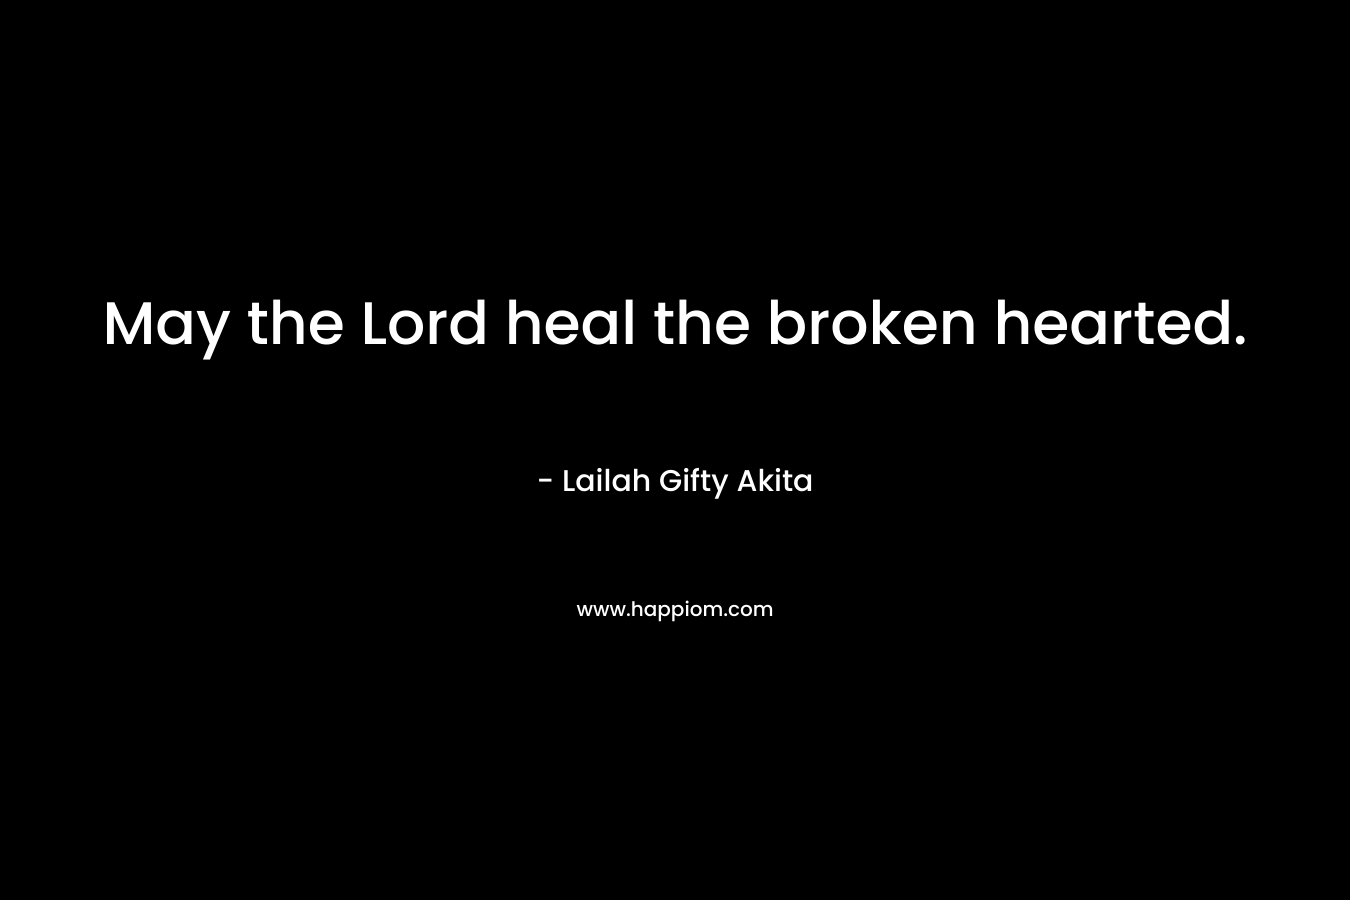 May the Lord heal the broken hearted. – Lailah Gifty Akita